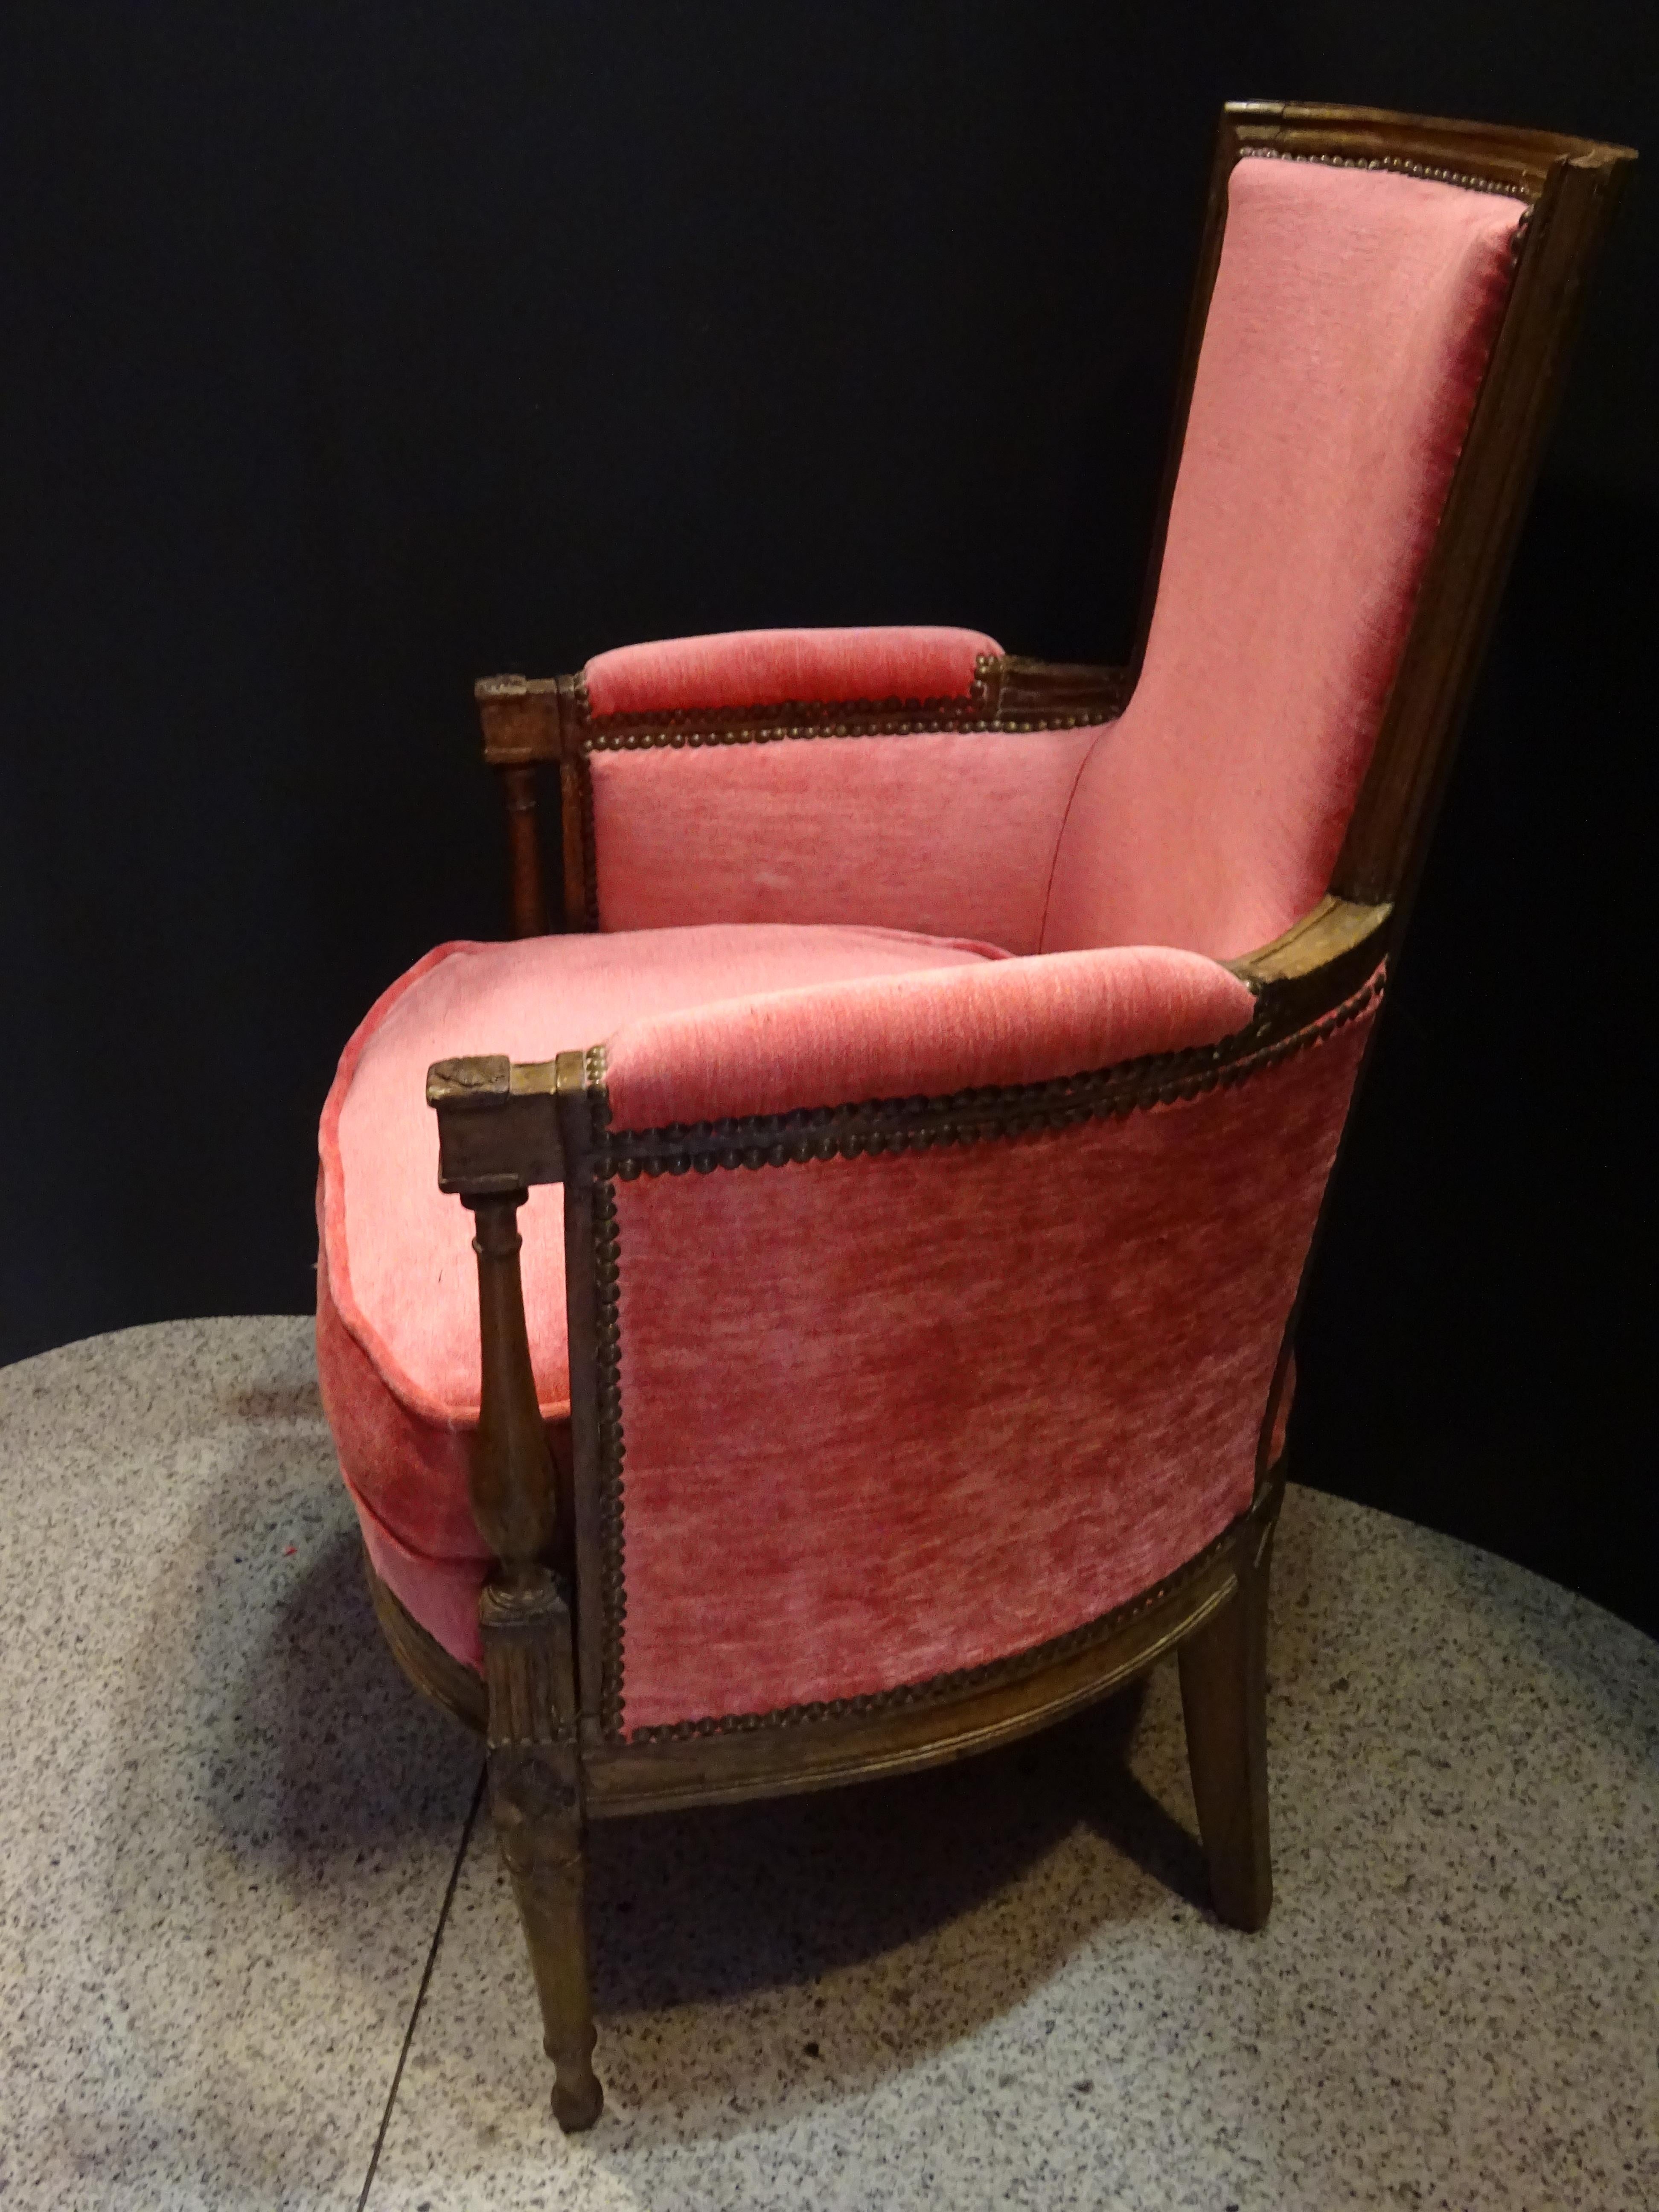 Late 18th Century Luis xvi French Walnut Wood and Pink Velvet Bergere Chair, circa 1790